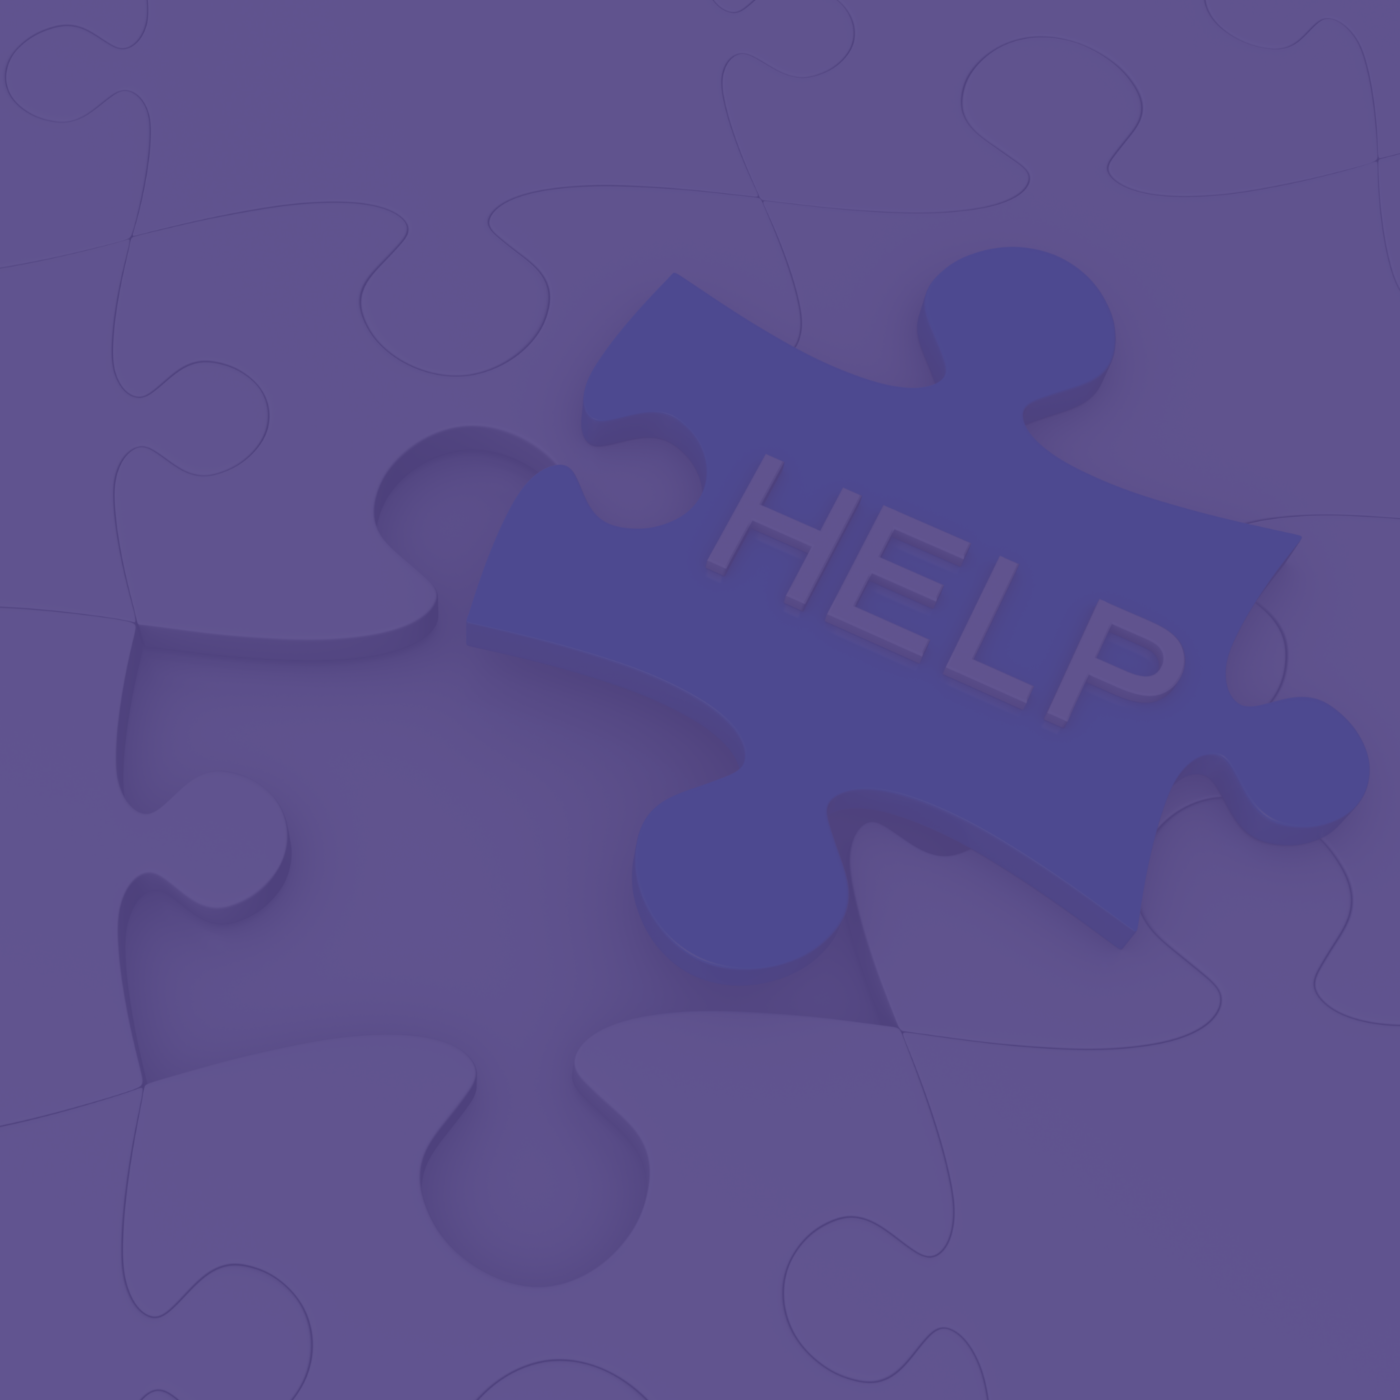 Image shows an incomplete puzzle. The final piece lays nearby, and has the word "help" printed on it.